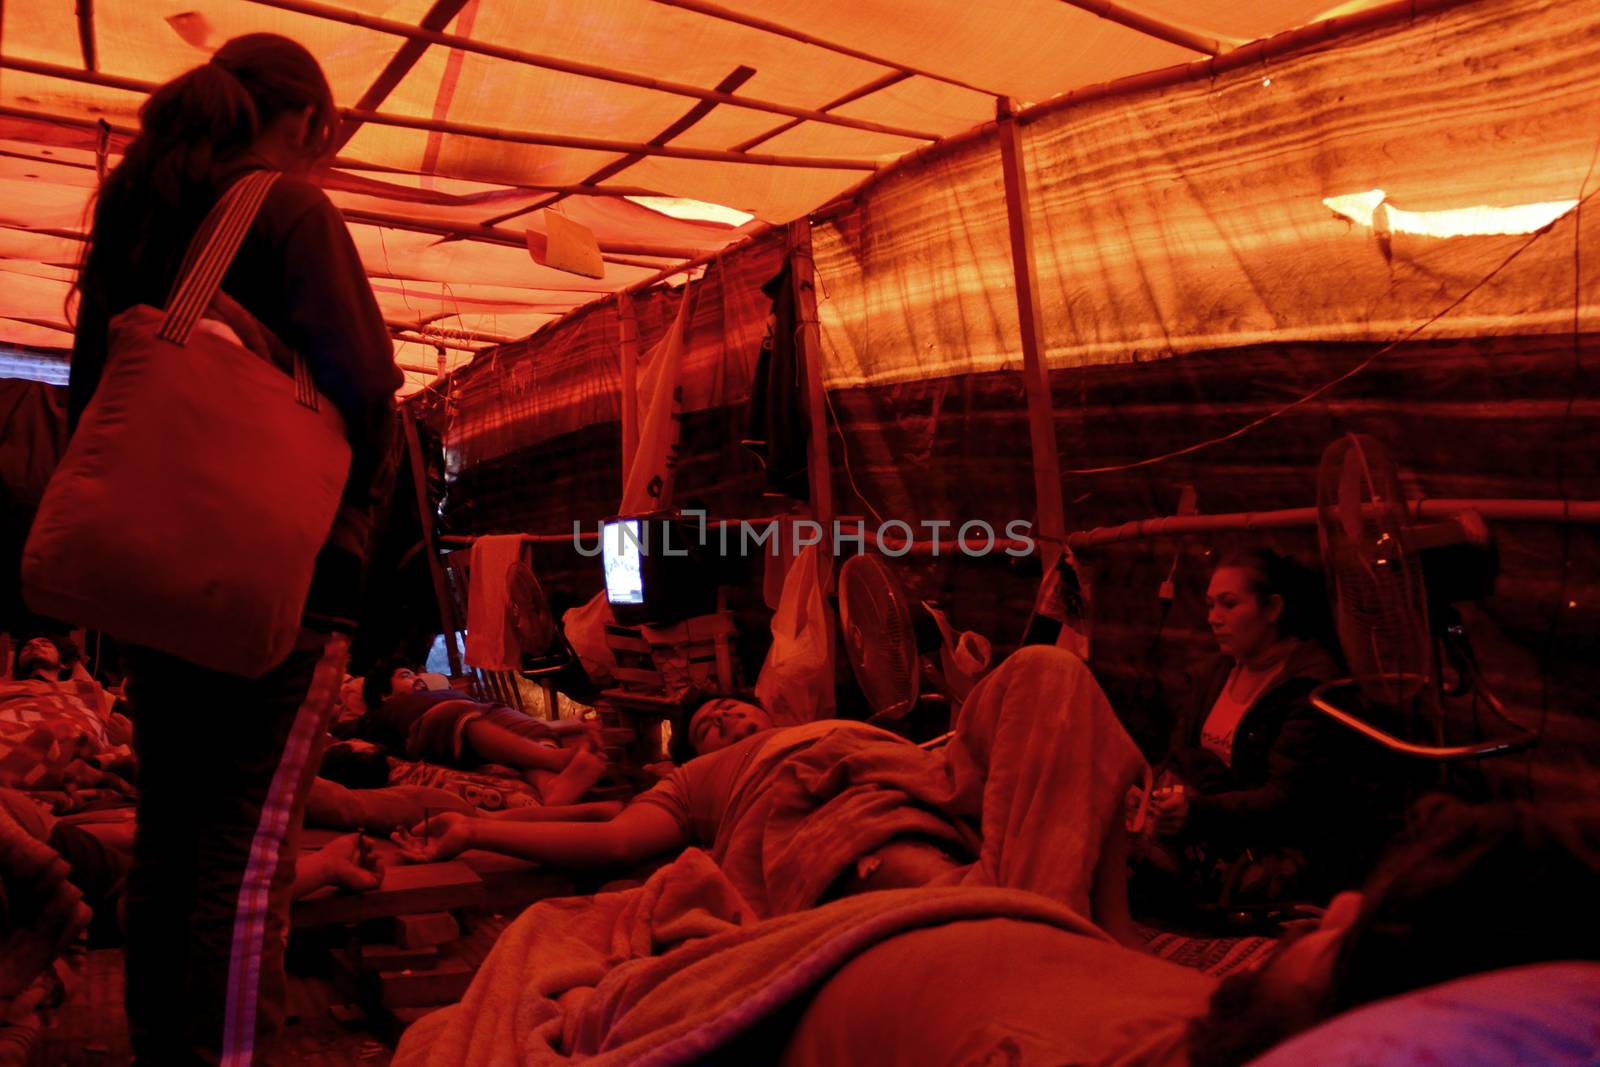 PARAGUAY, Greater Asuncion: 23 bus drivers from the firm Line 49, including one woman, lie crucified in front of the Labor, Employment and Social Security Ministry in Asuncion, on September 14, 2015. 	It has been 76 days since they started to protest after being dismissed by the company. More and more of the protesters have turned to crucifixion during this period to raise awareness of their cause. Some of them have also sewn their lips together on hunger strike. 